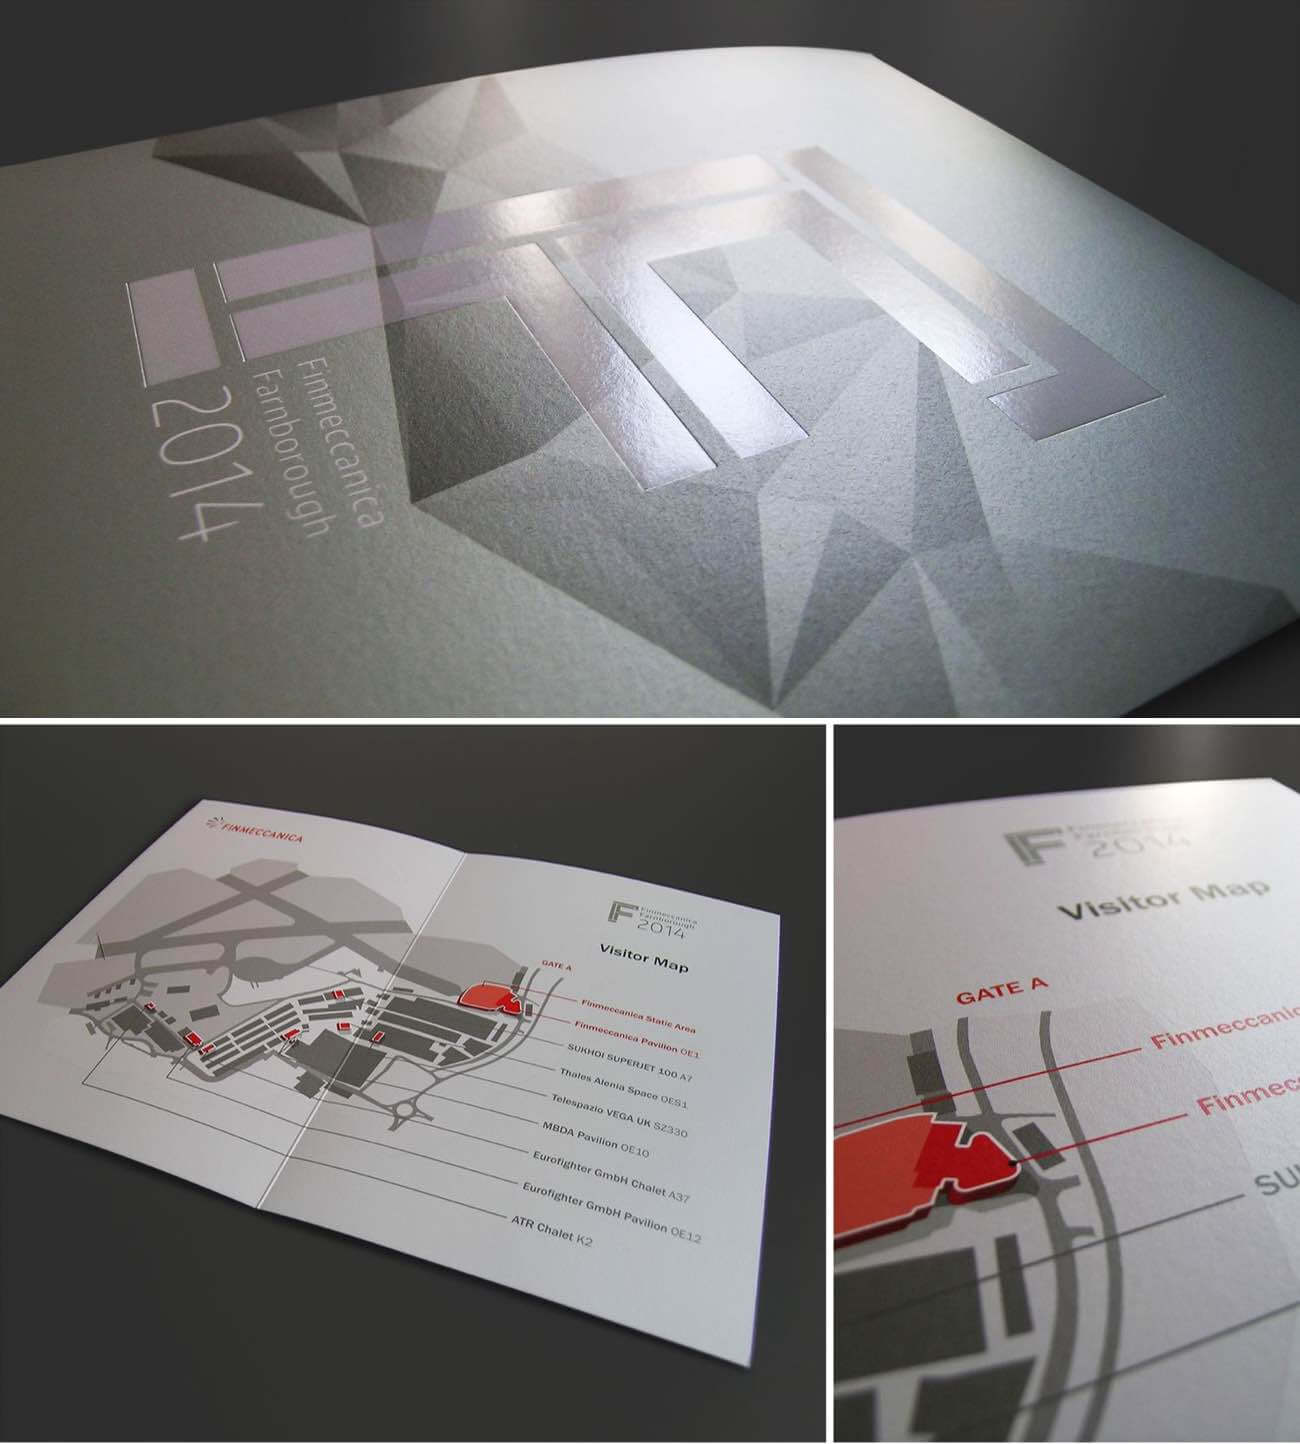 The detail of a glossy double F logo, and the visitor map for the event.